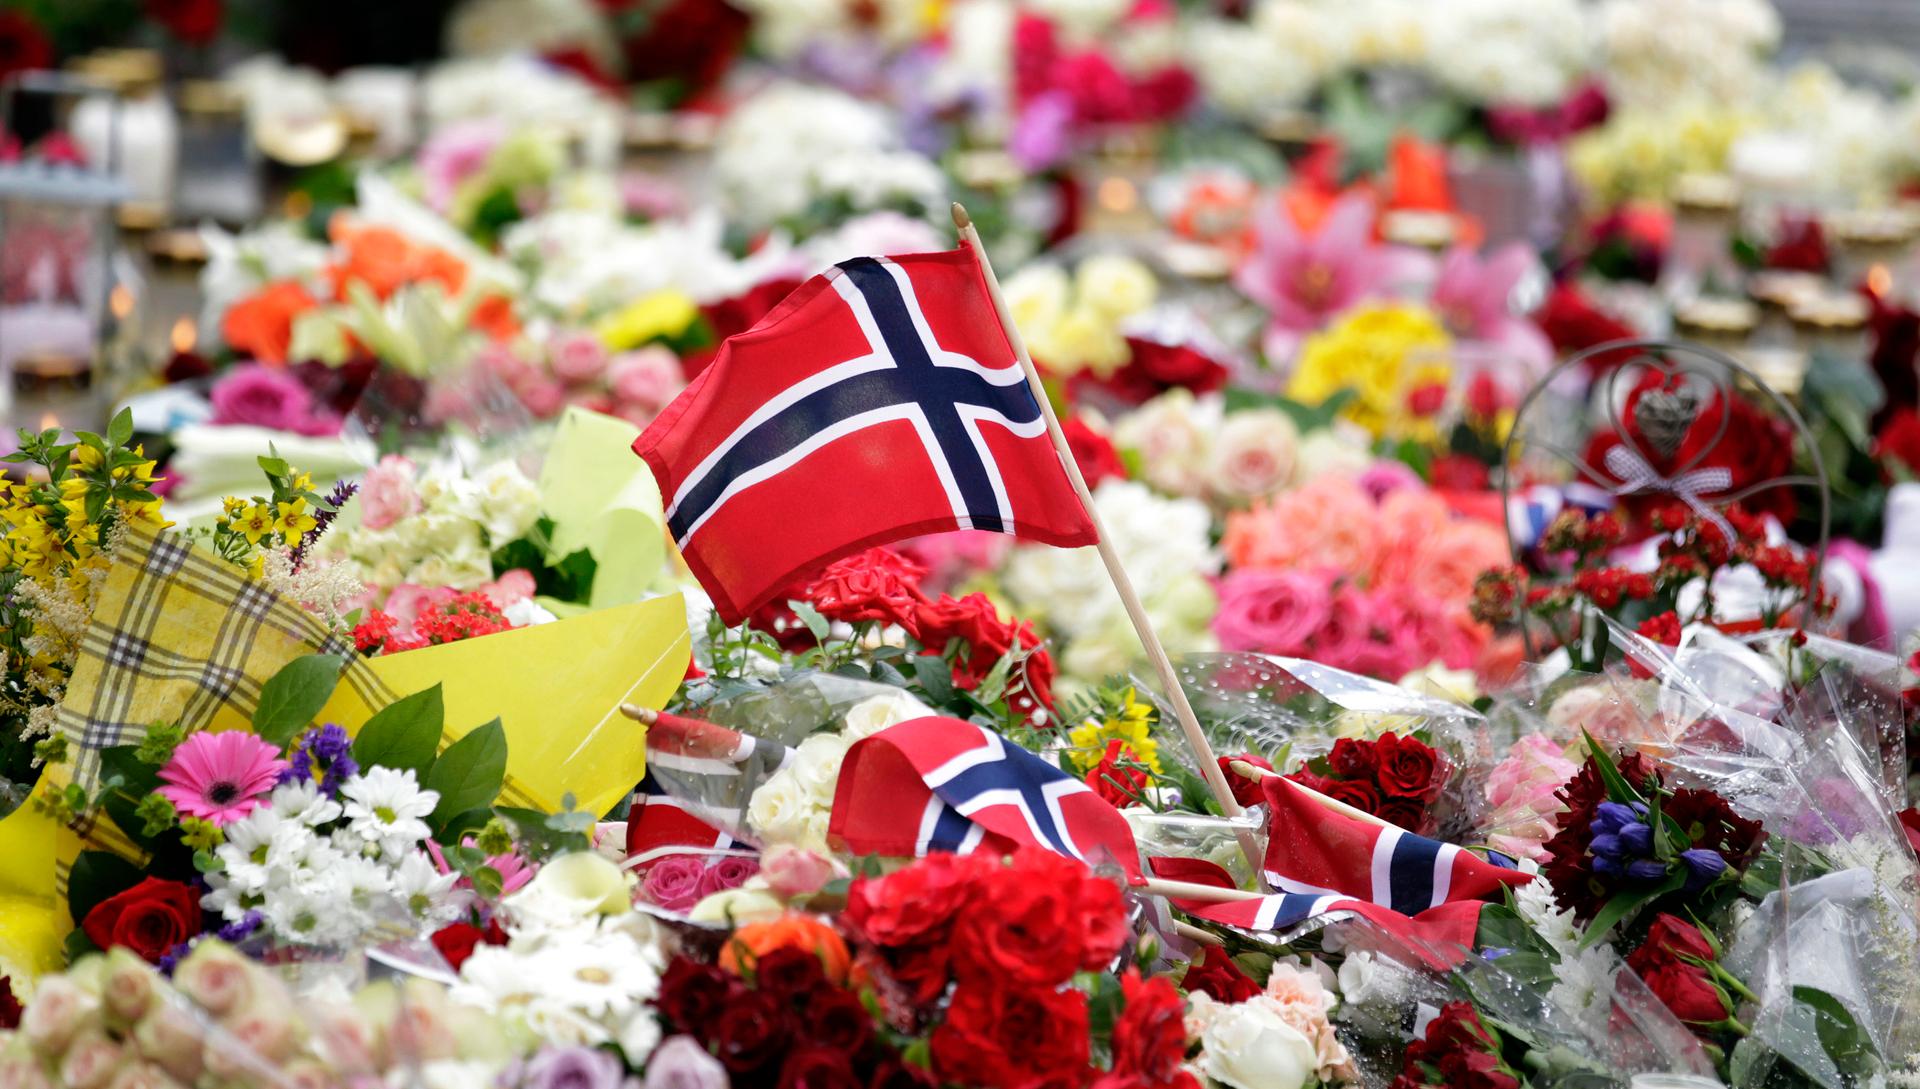 A Norwegian flag is placed amongst floral tributes outside the Oslo cathedral July 24, 2011. A right-wing zealot who admitted to bomb and gun attacks in Norway that killed 92 people on Friday claims he acted alone, Norway's police said on Sunday.